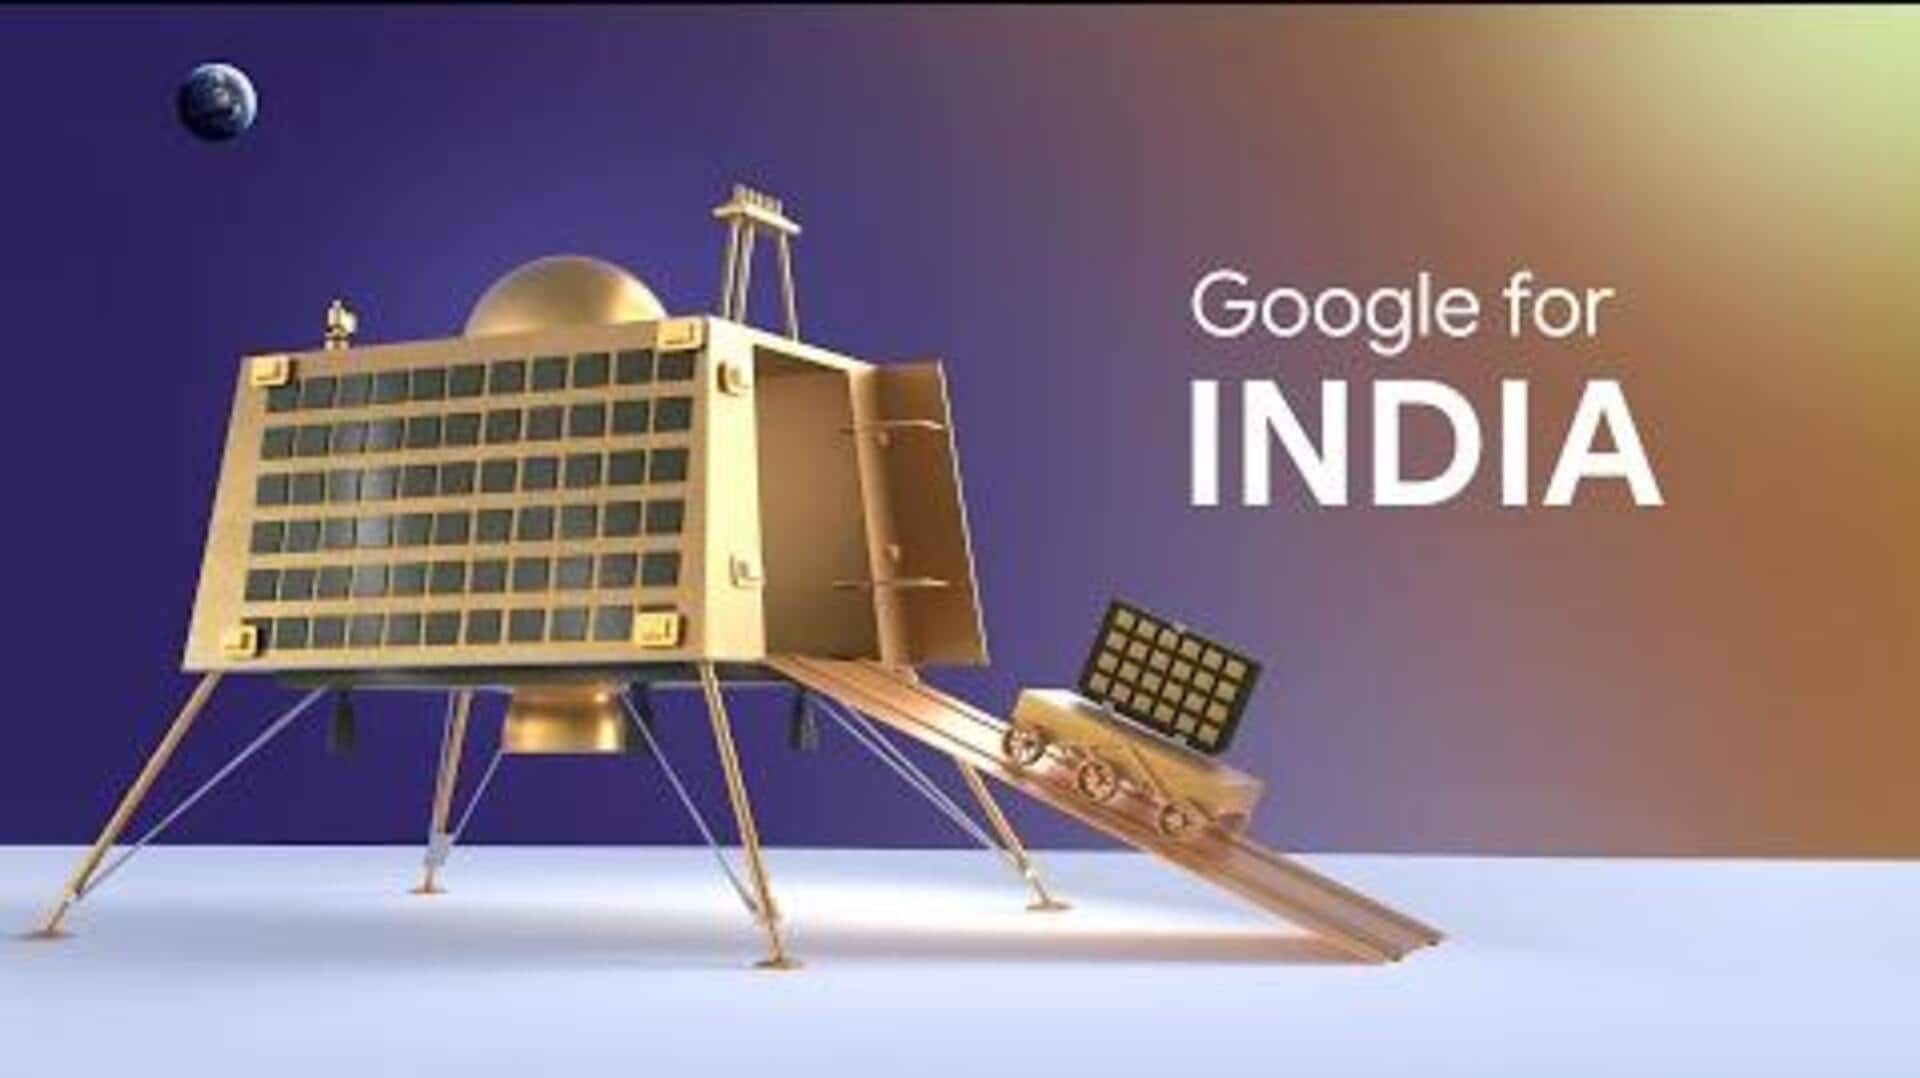 'Google for India' event on October 19: What to expect